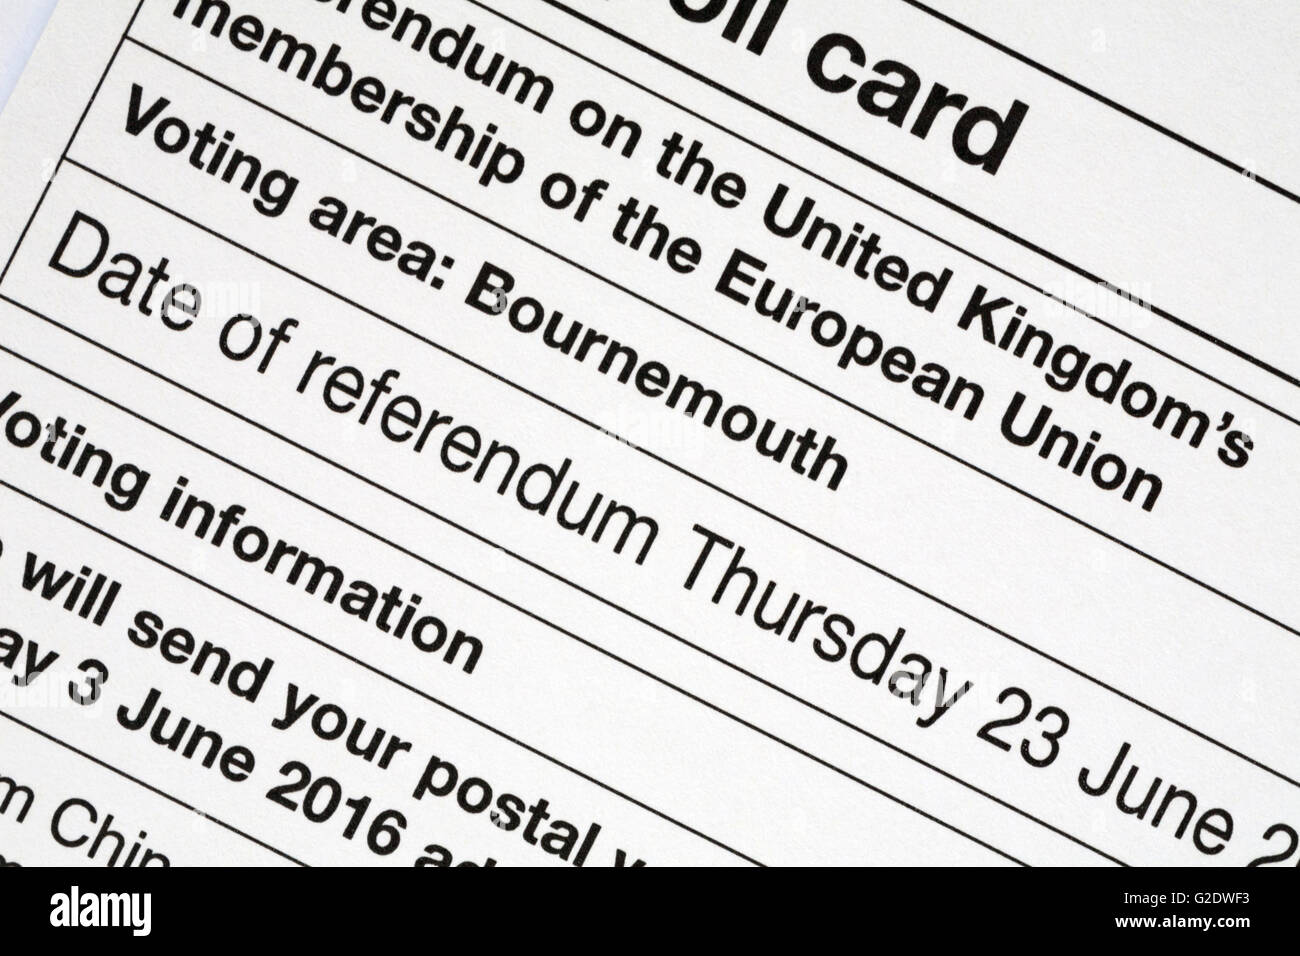 Postal poll card details of Referendum on the United Kingdom's membership of the European Union 16 voting area Bournemouth Stock Photo